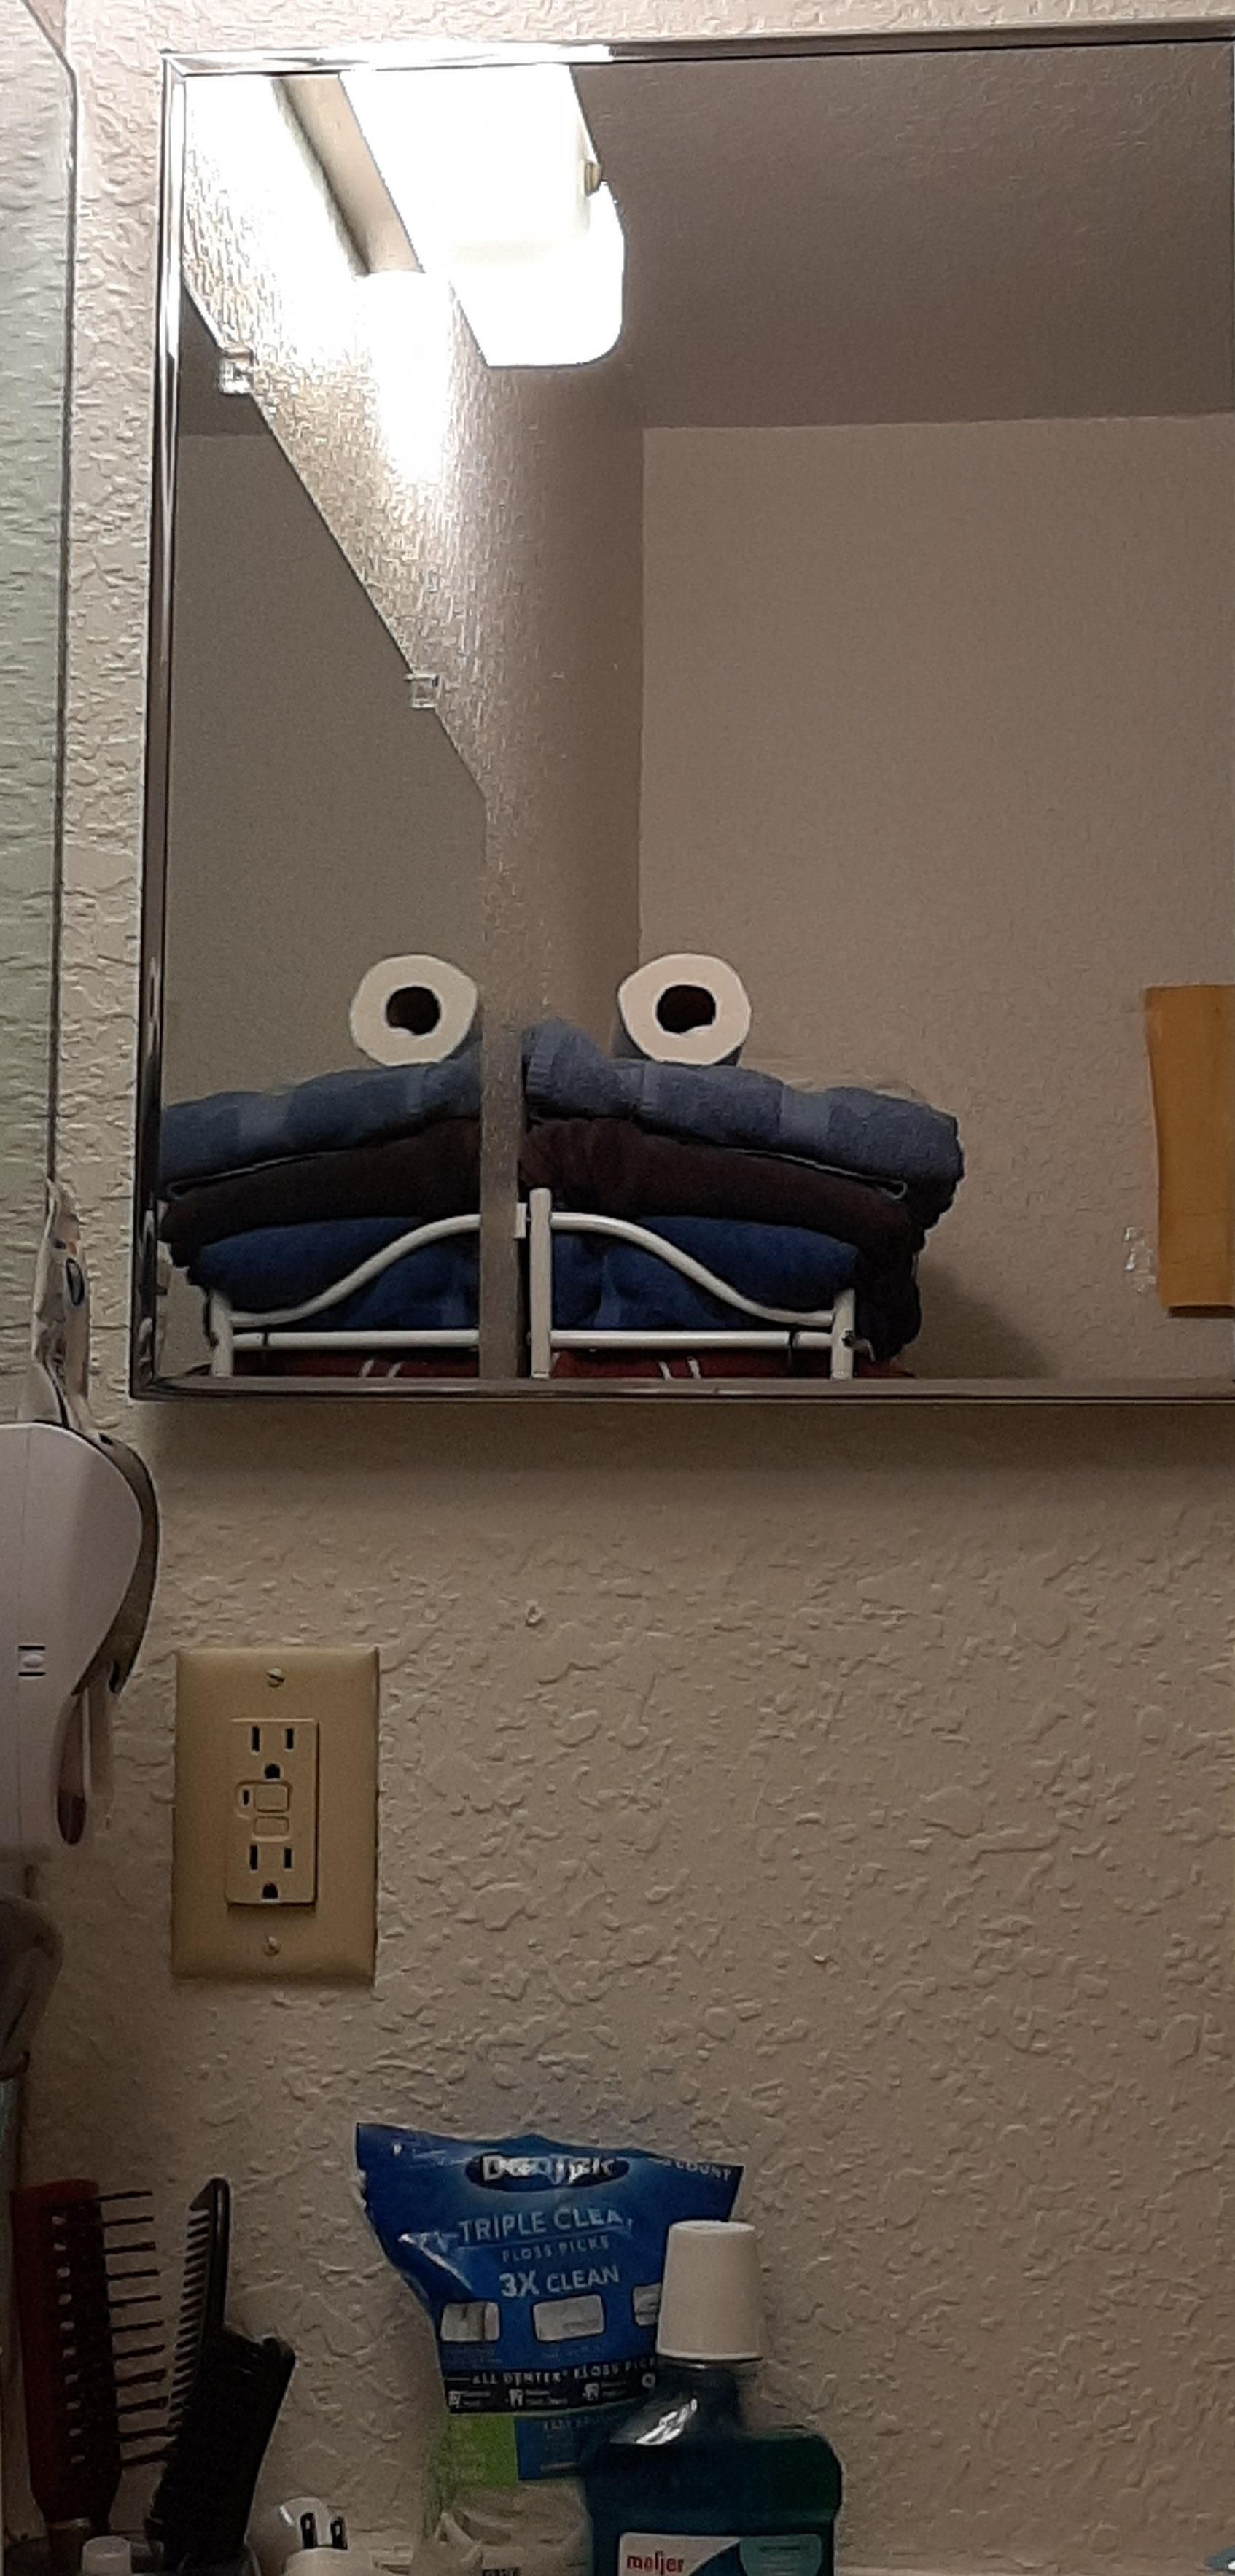 Reflection view from toilet looks like cookie monster.